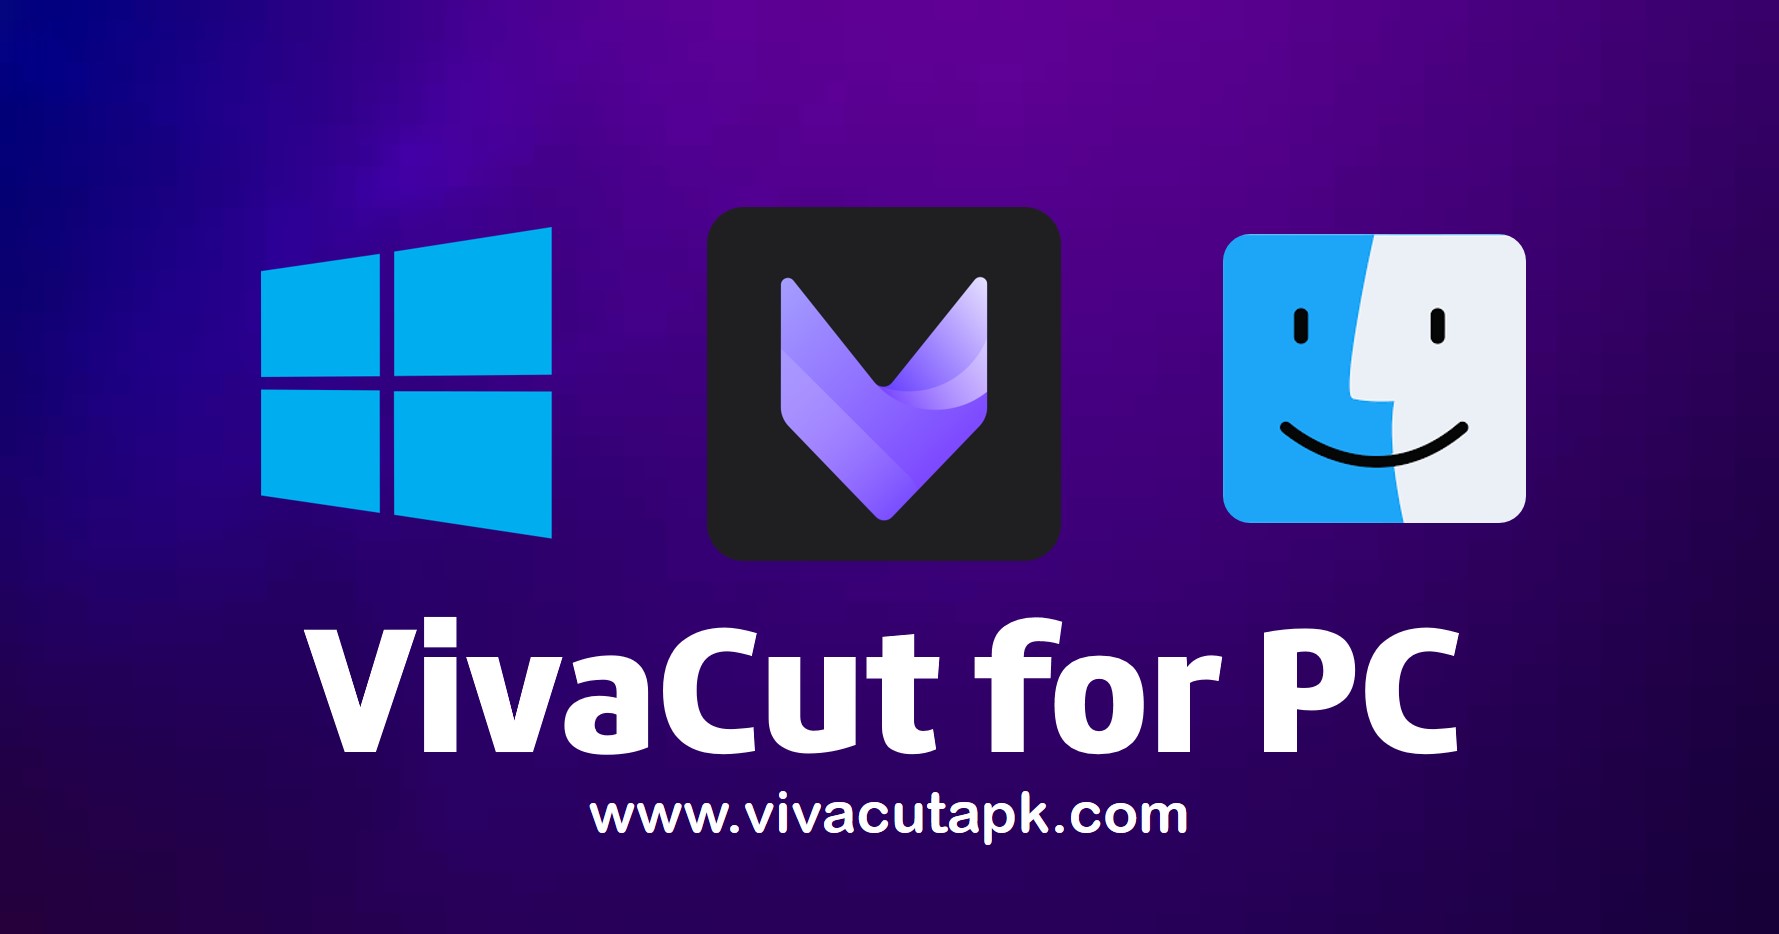 Vivacut for PC | Pro Video Editor Free Download for Windows and Mac